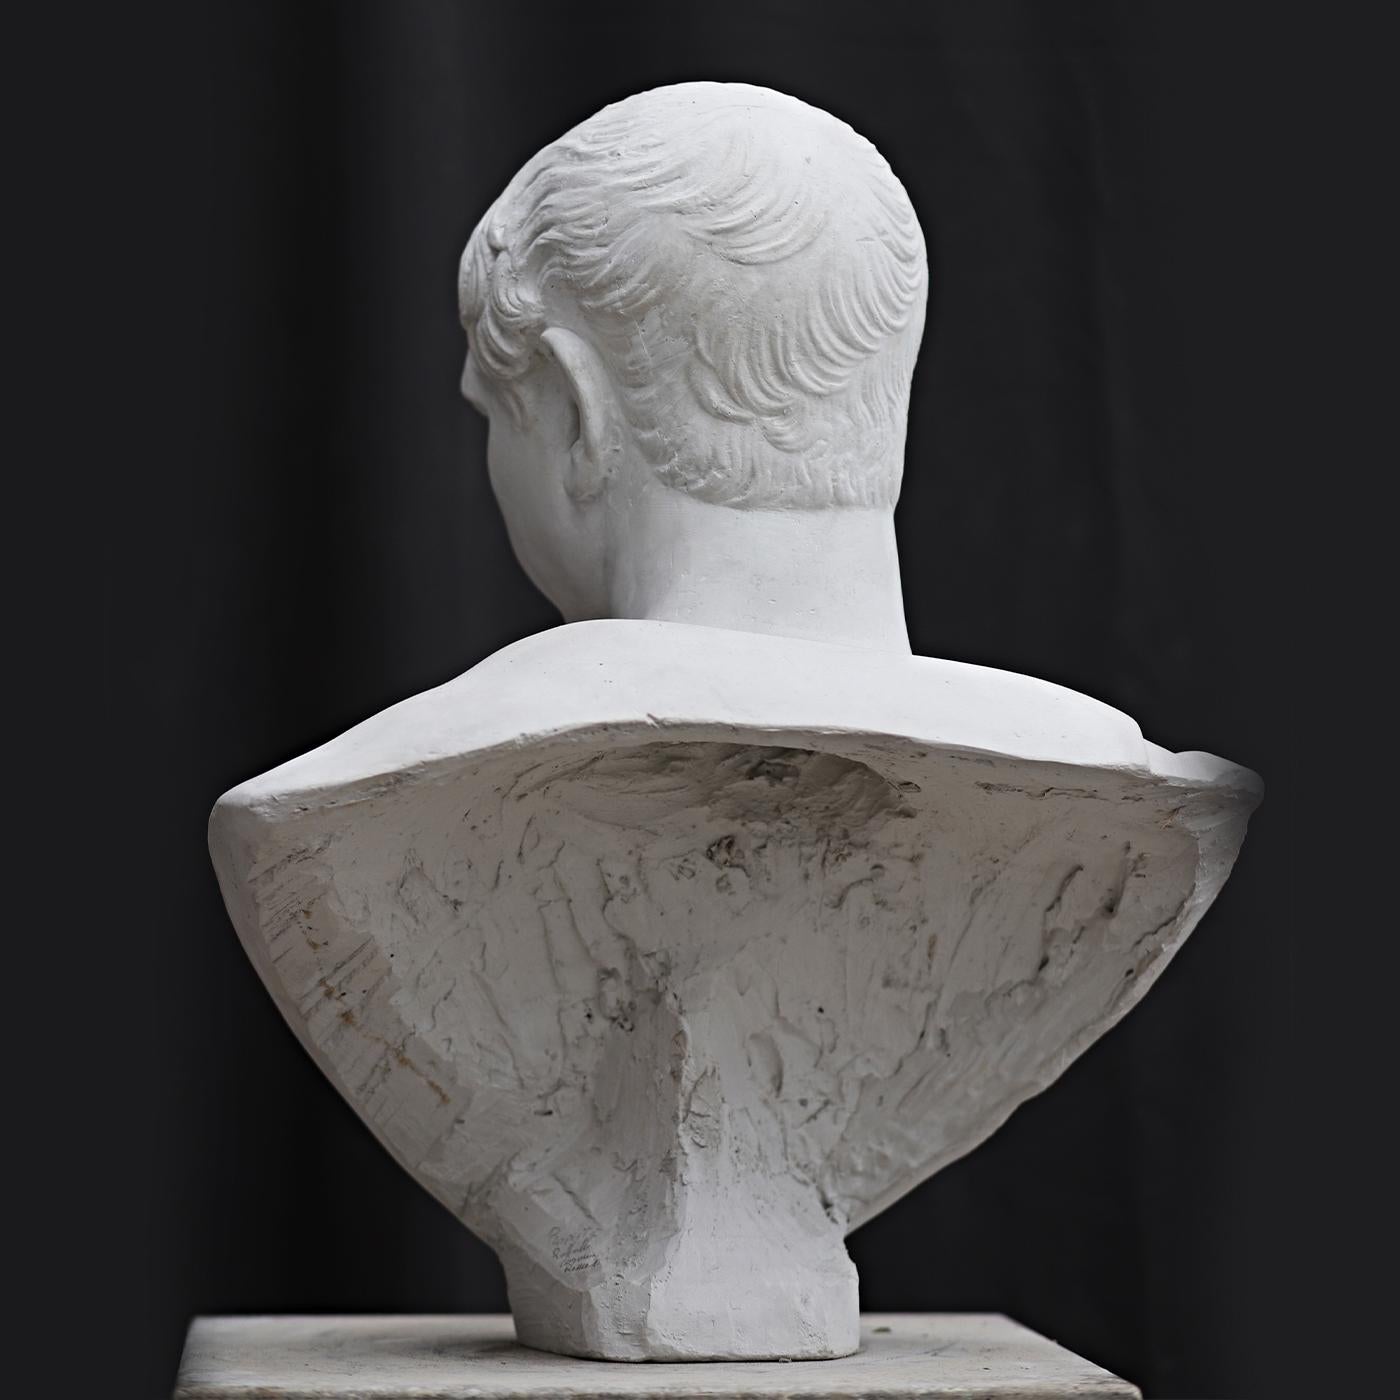 Depicting Traiano, known as one of the most influential Roman emperors, this stupendous bust will elevate the look of any decor style with utmost sophistication. Handcrafted by Romanelli's artisans with meticulous care for details, it features sharp